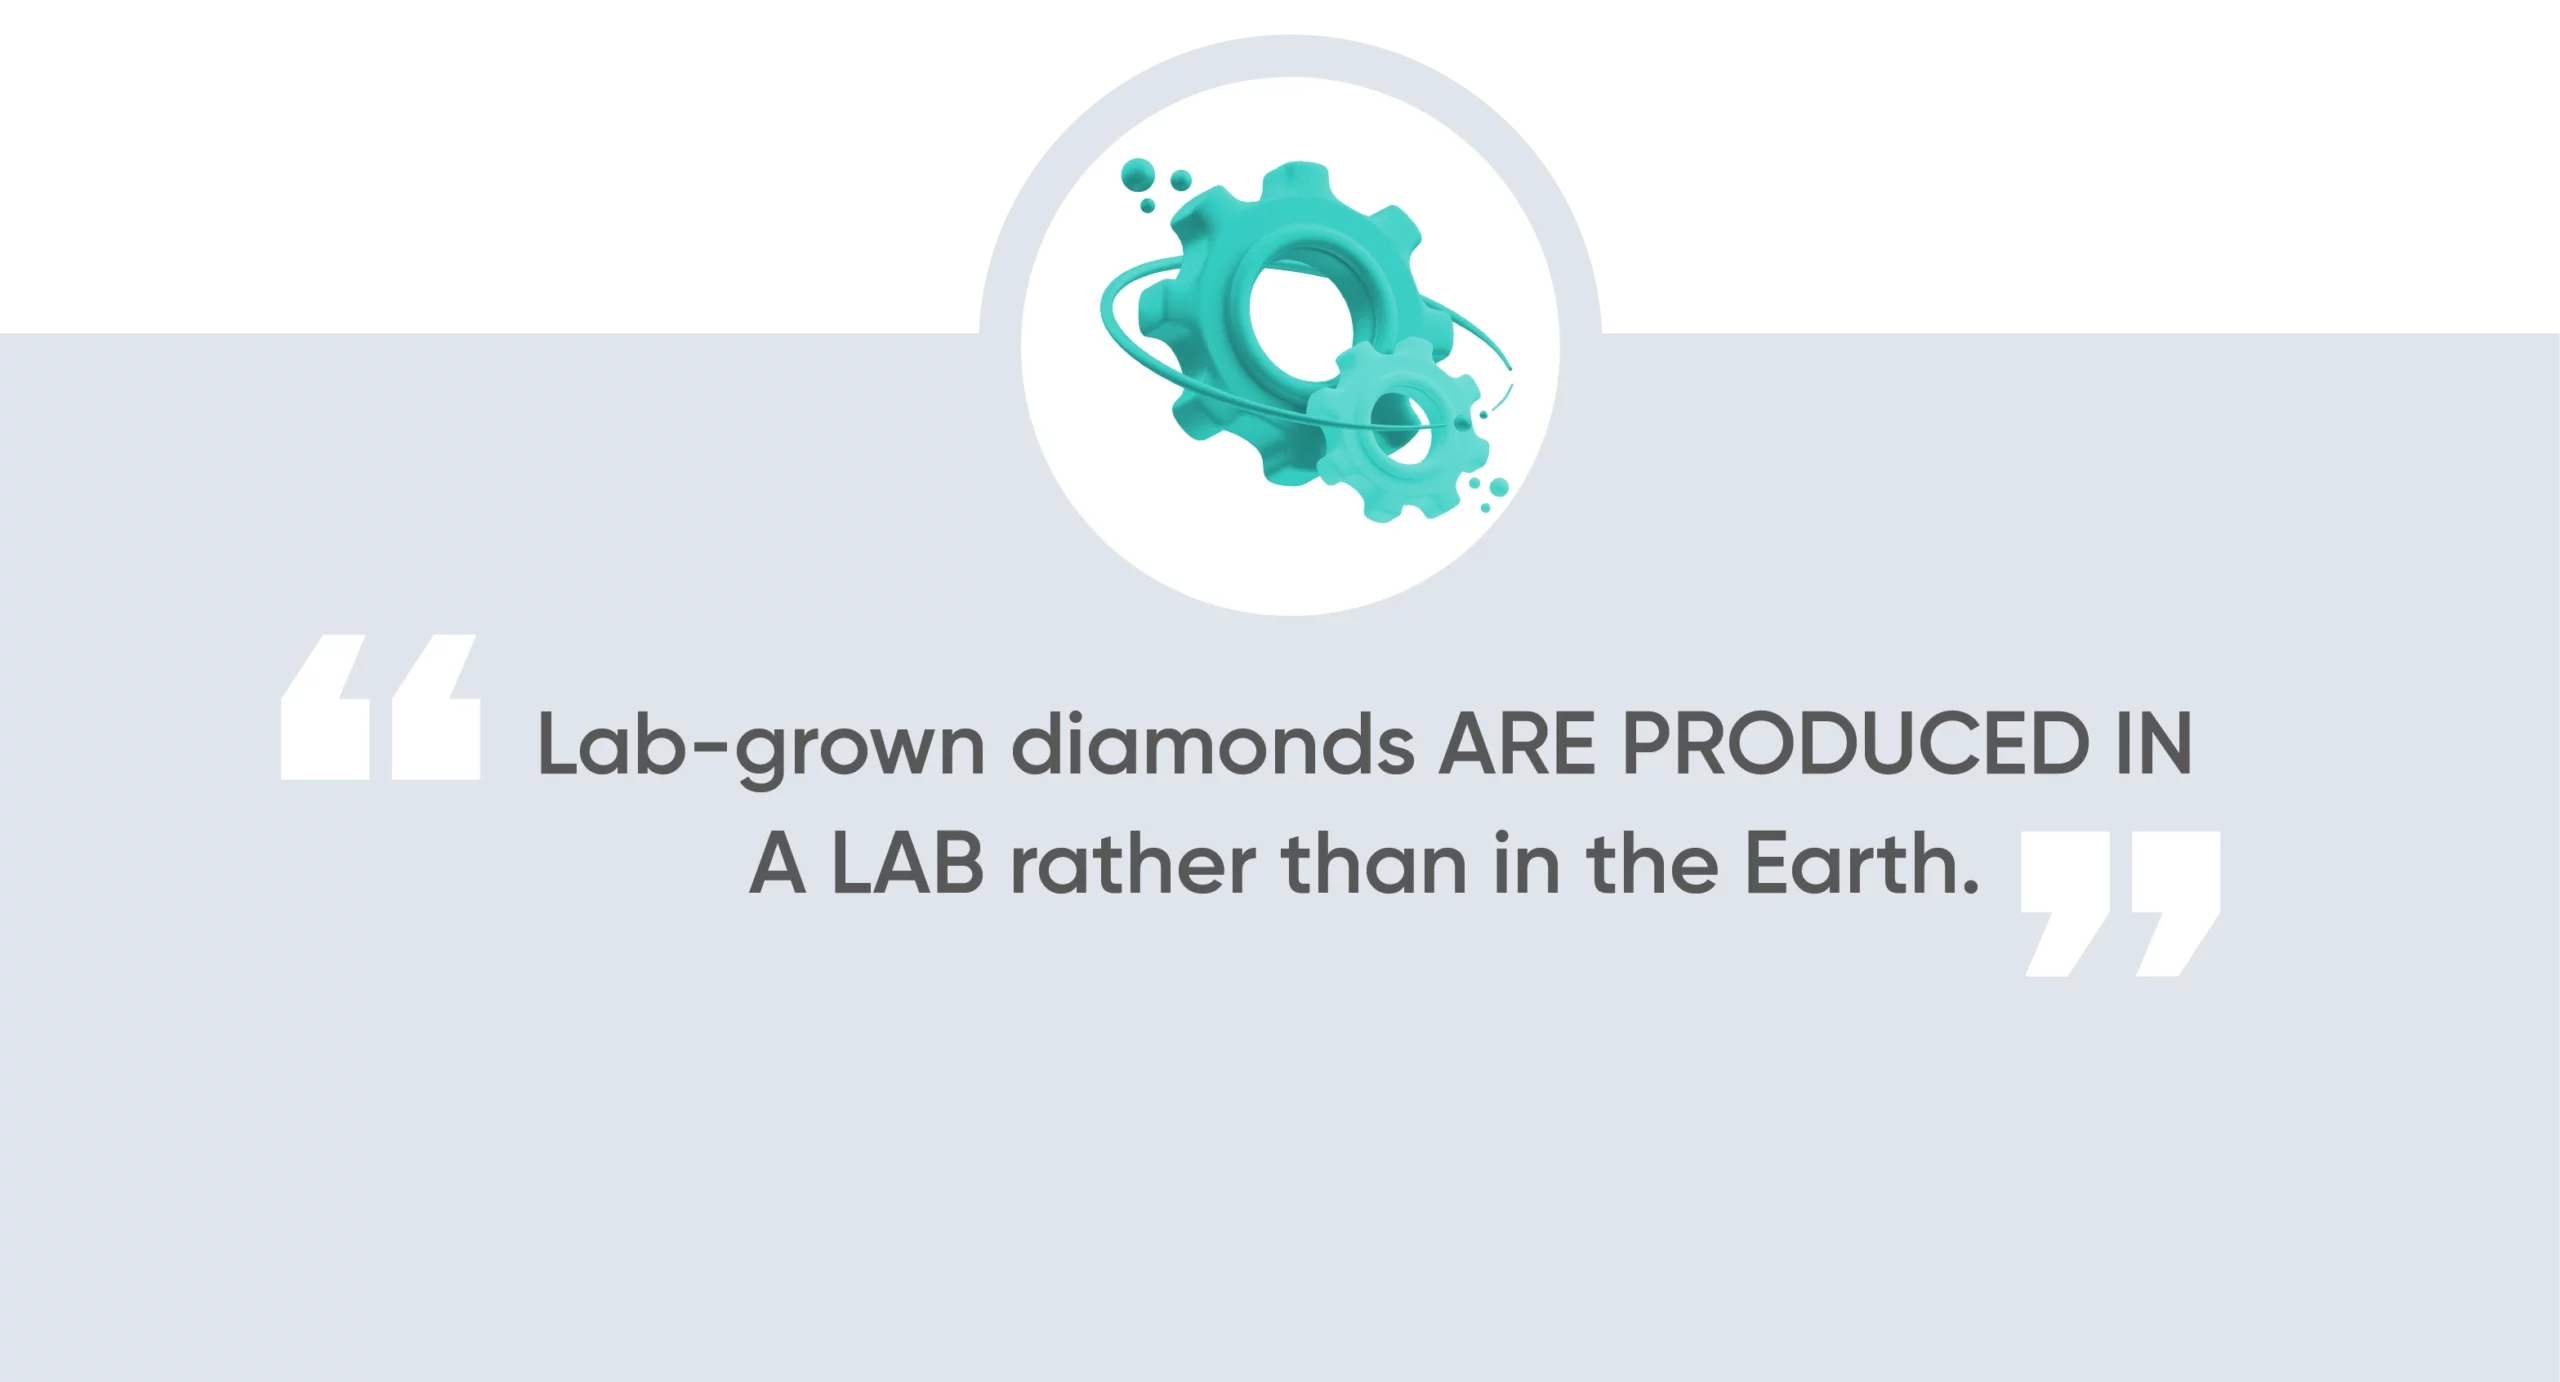 Lab-grown diamonds are produced in a lab rather than in the Earth.